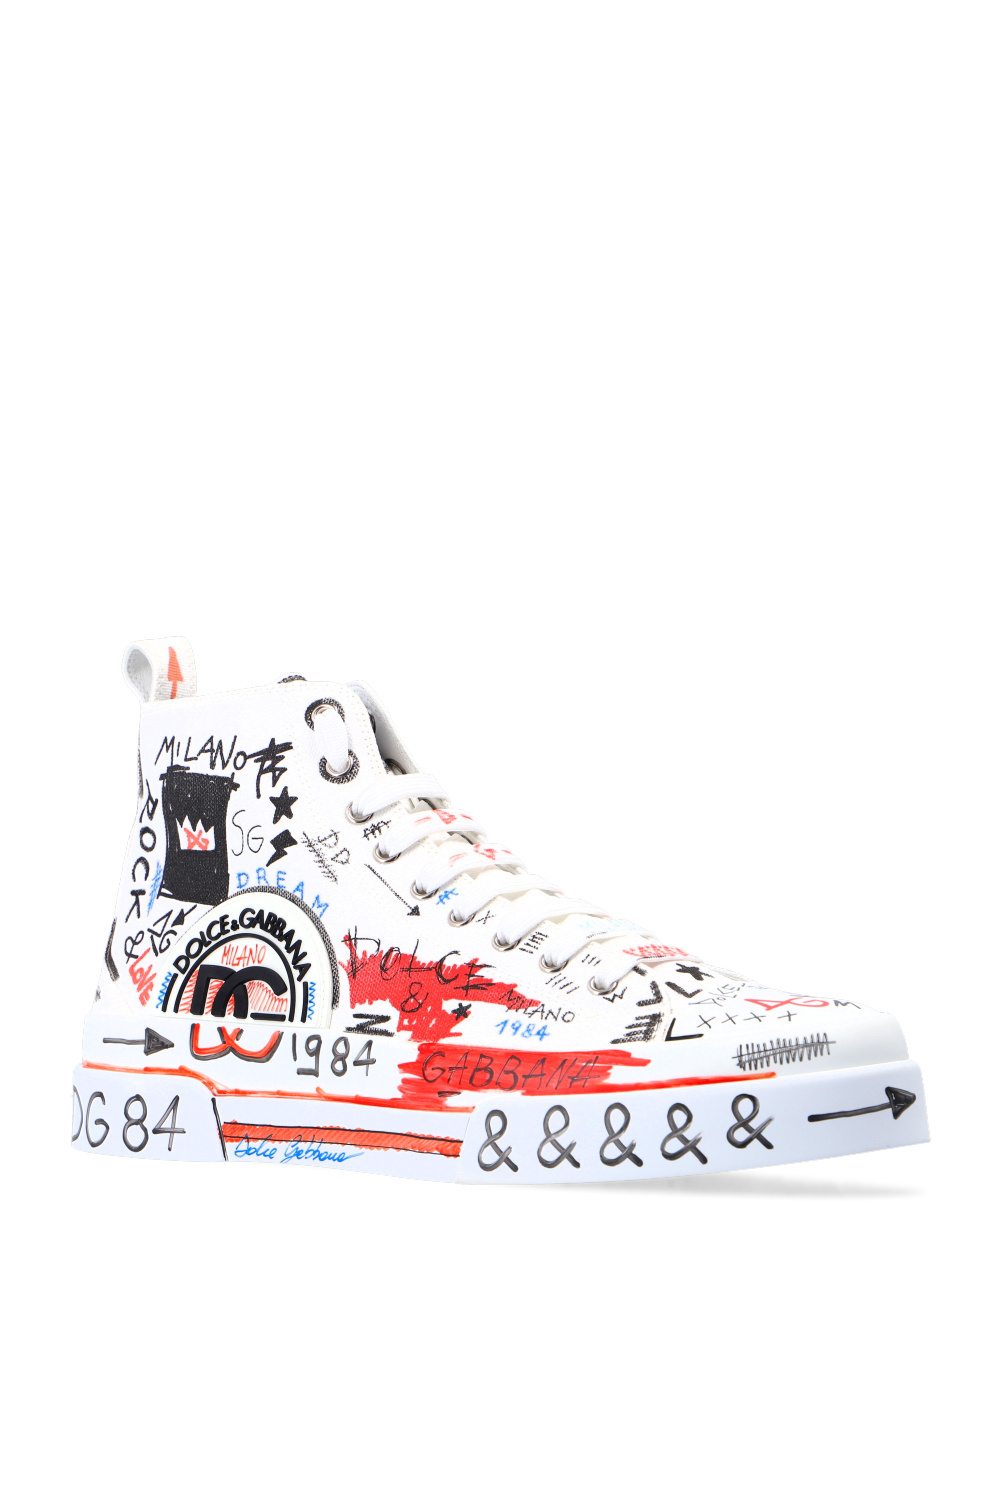 Dolce & Gabbana Patterned sneakers